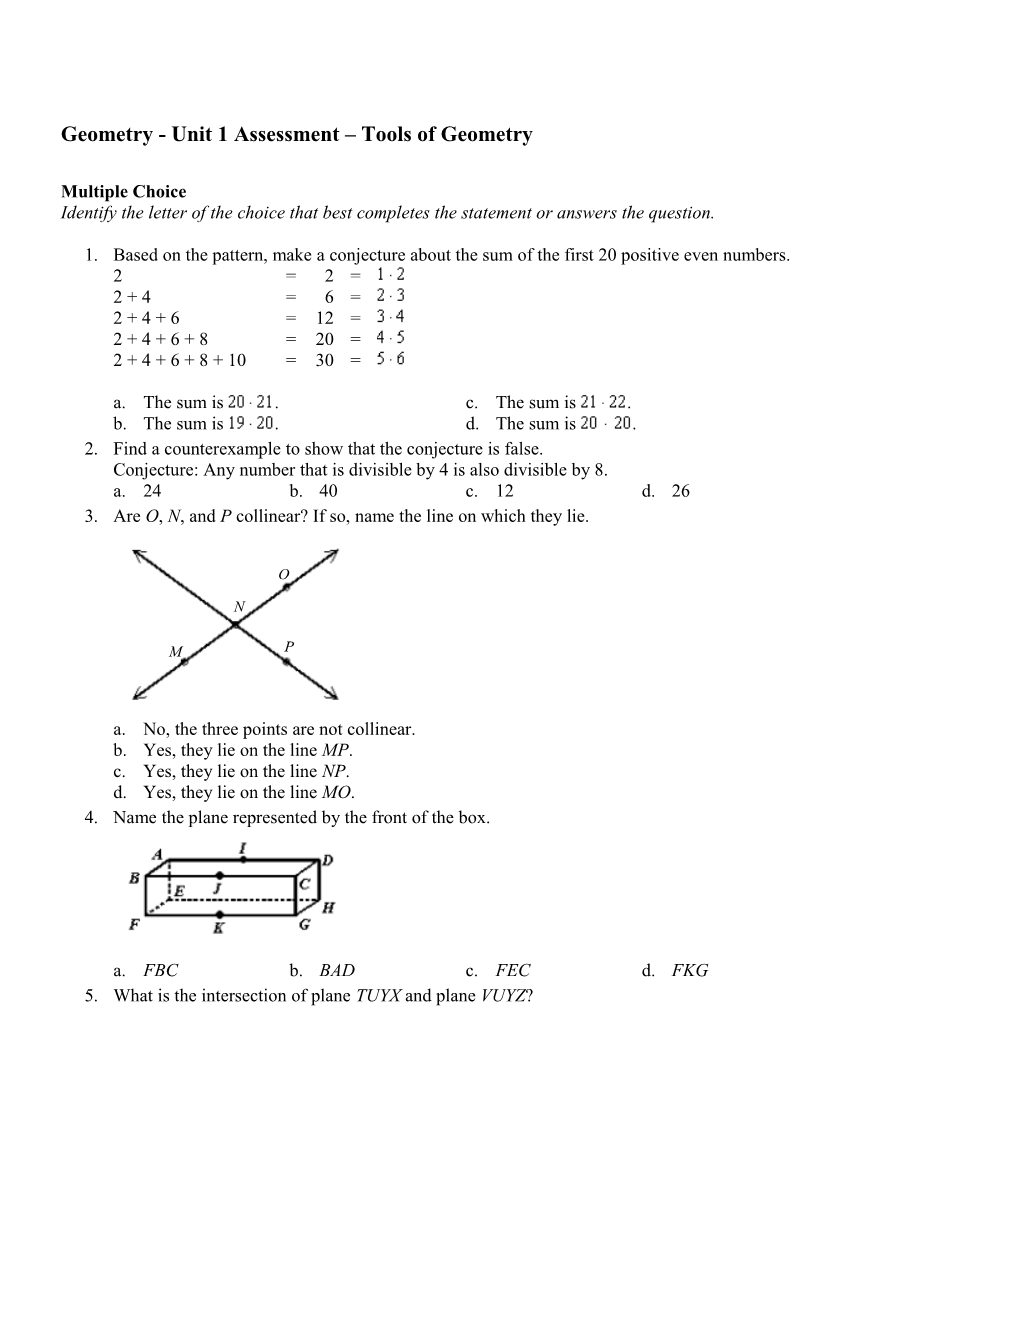 Geometry - Chapter 1 Test